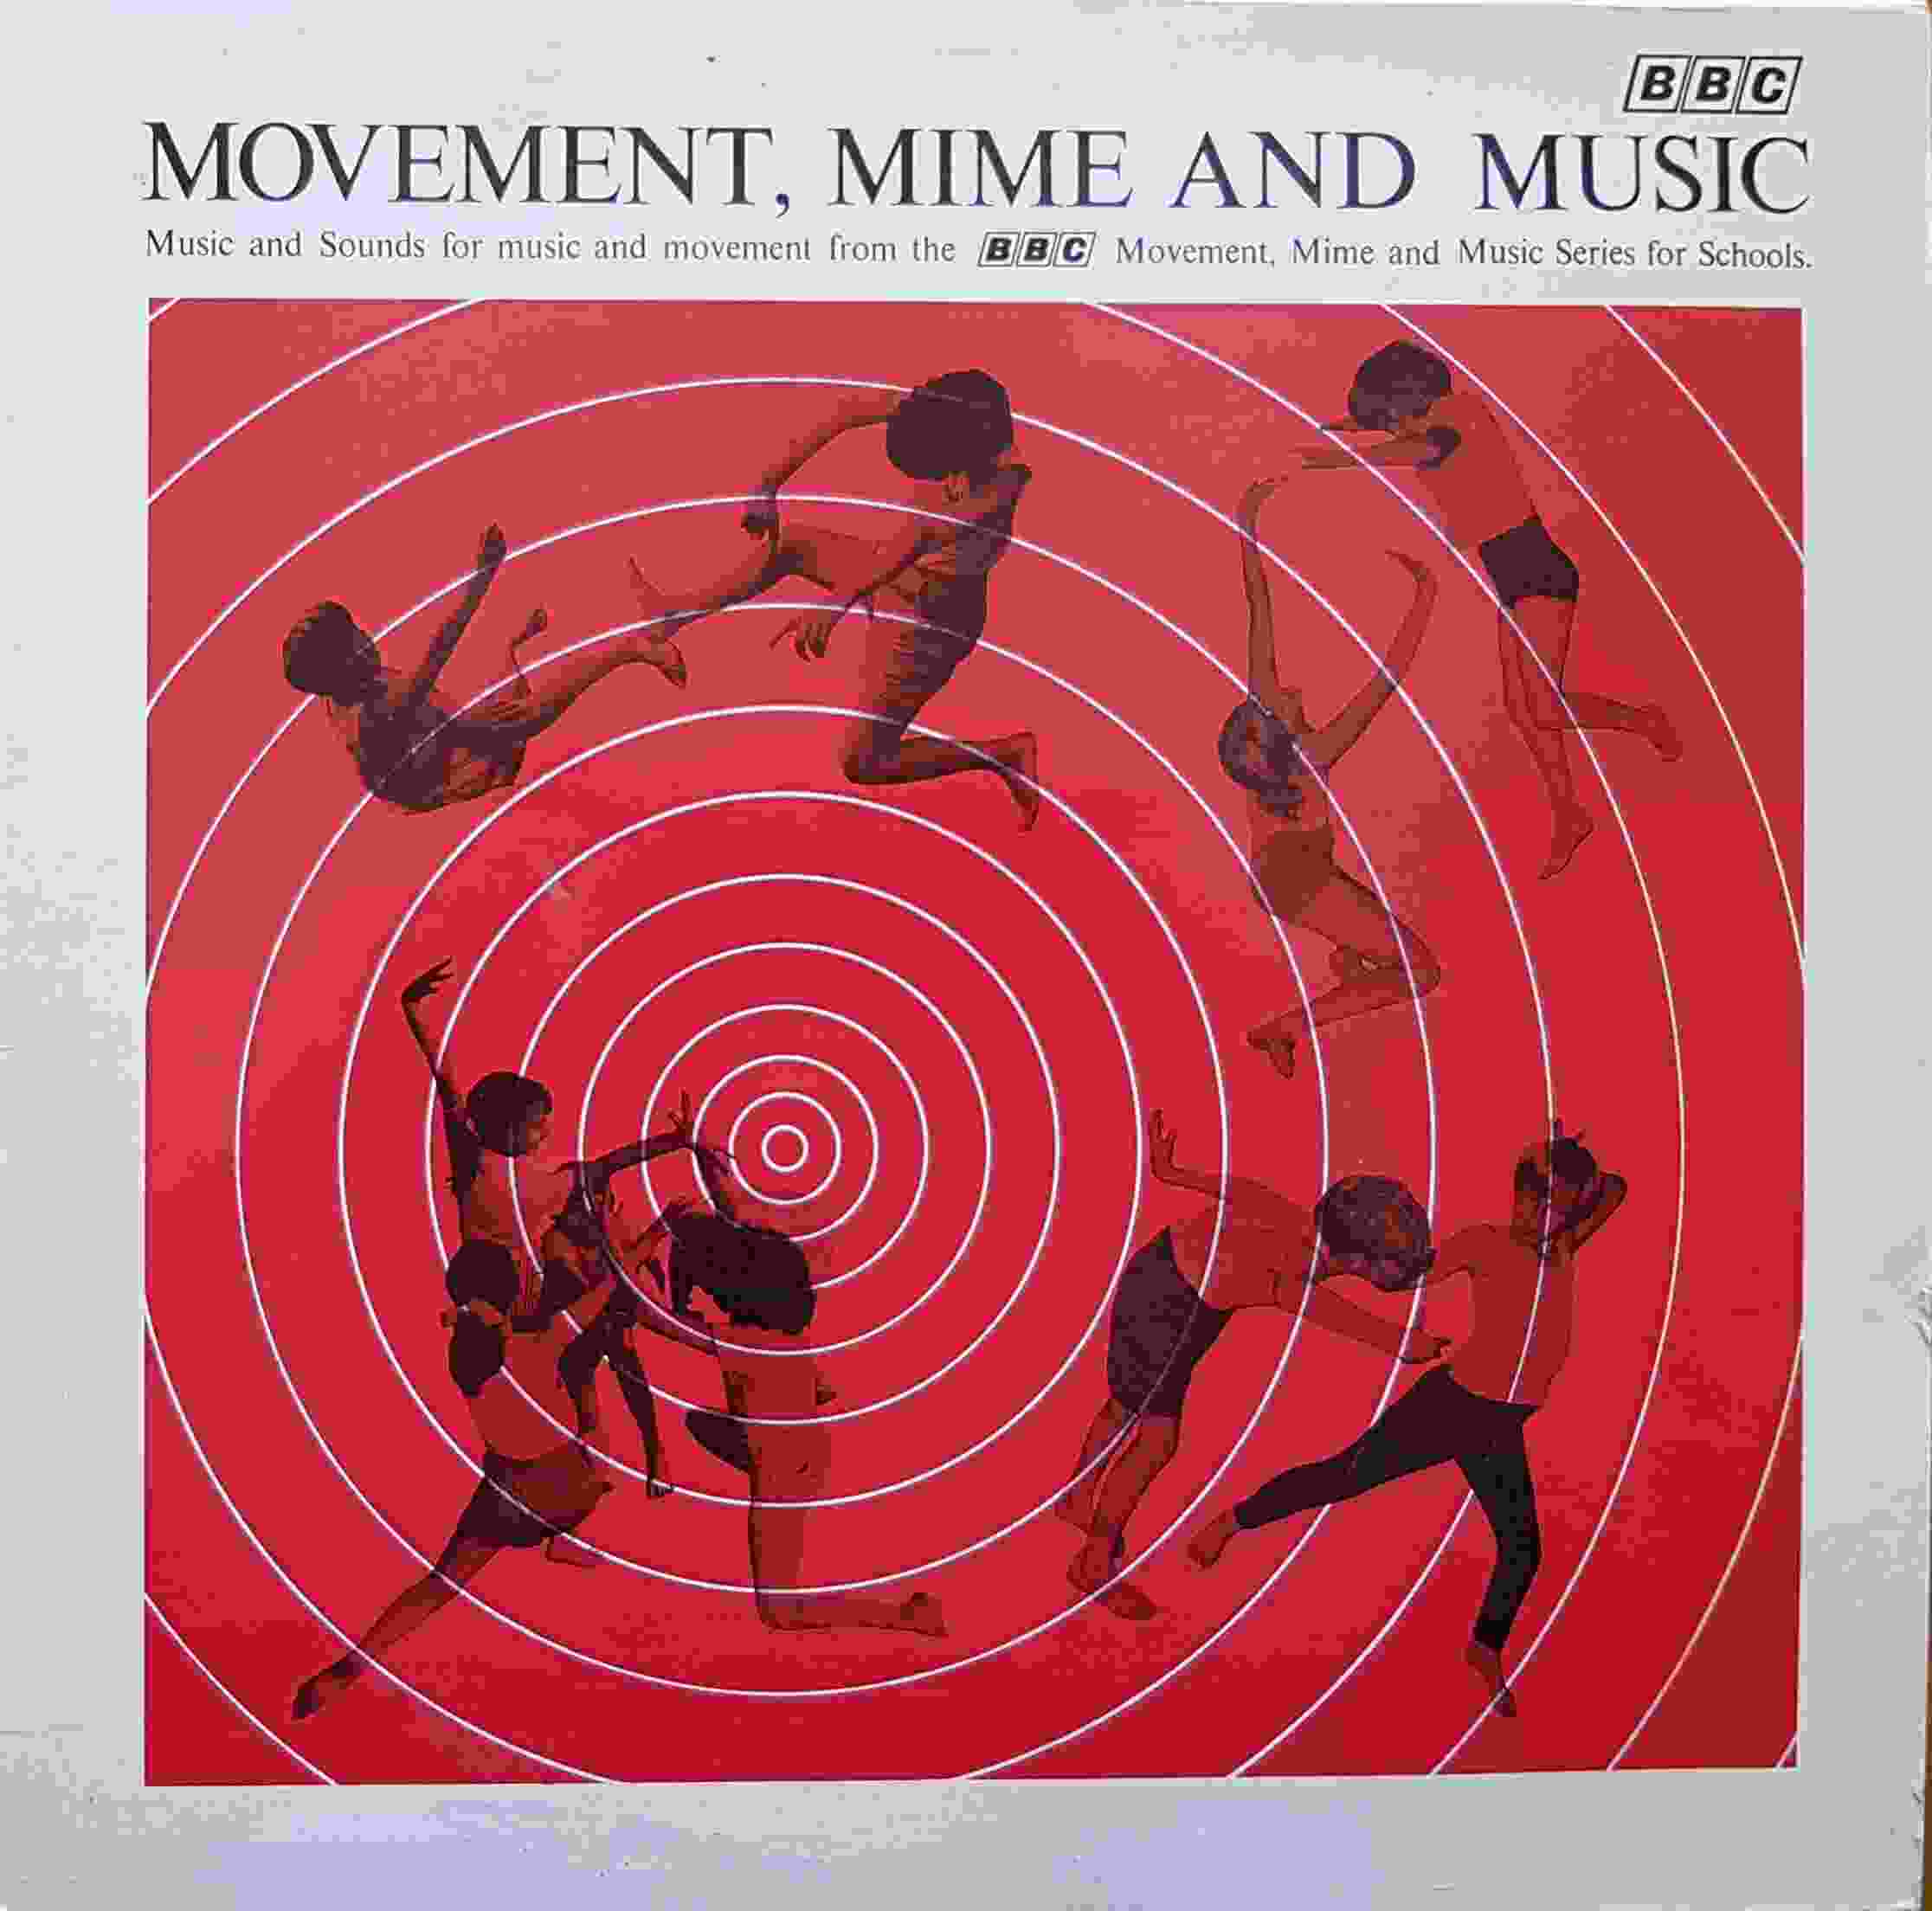 Picture of Movement, mime and music by artist Derbyshire / Baker from the BBC albums - Records and Tapes library